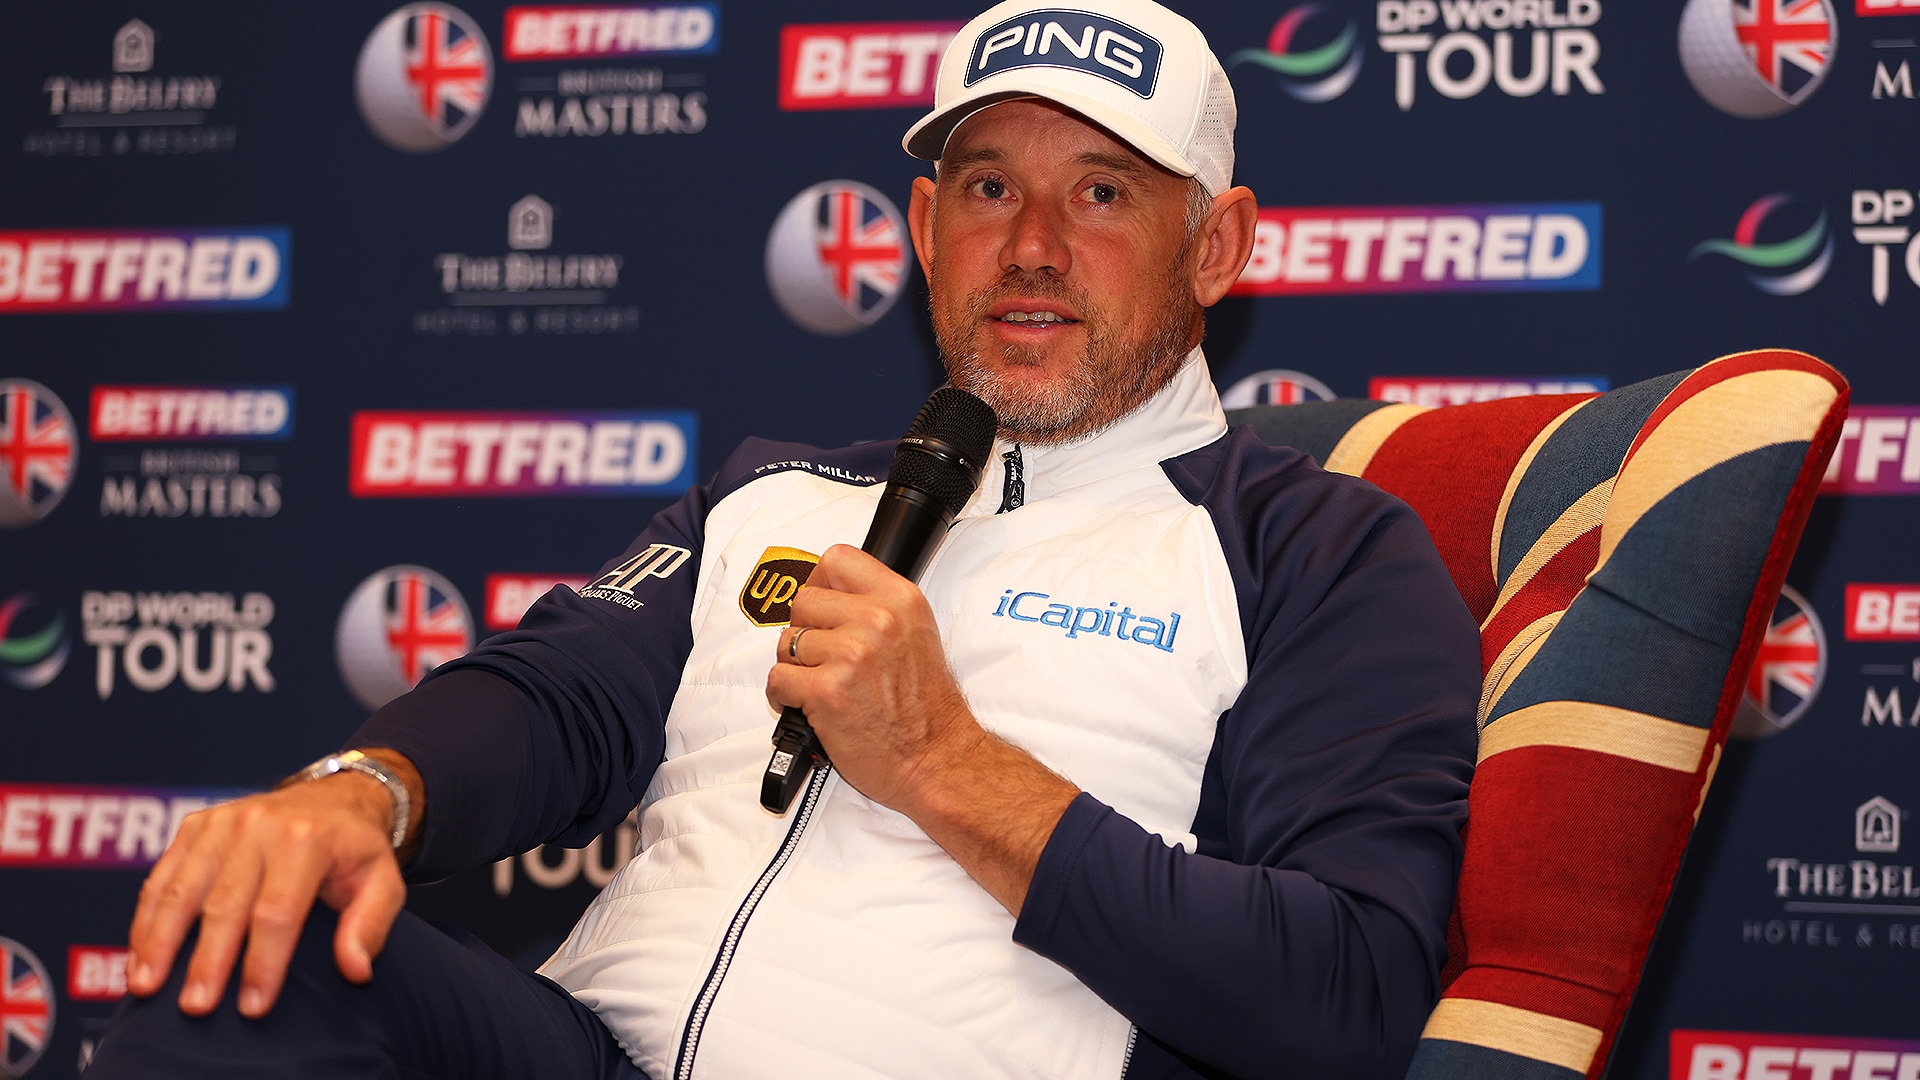 Lee Westwood Explains Why He Has Asked for LIV Golf Release